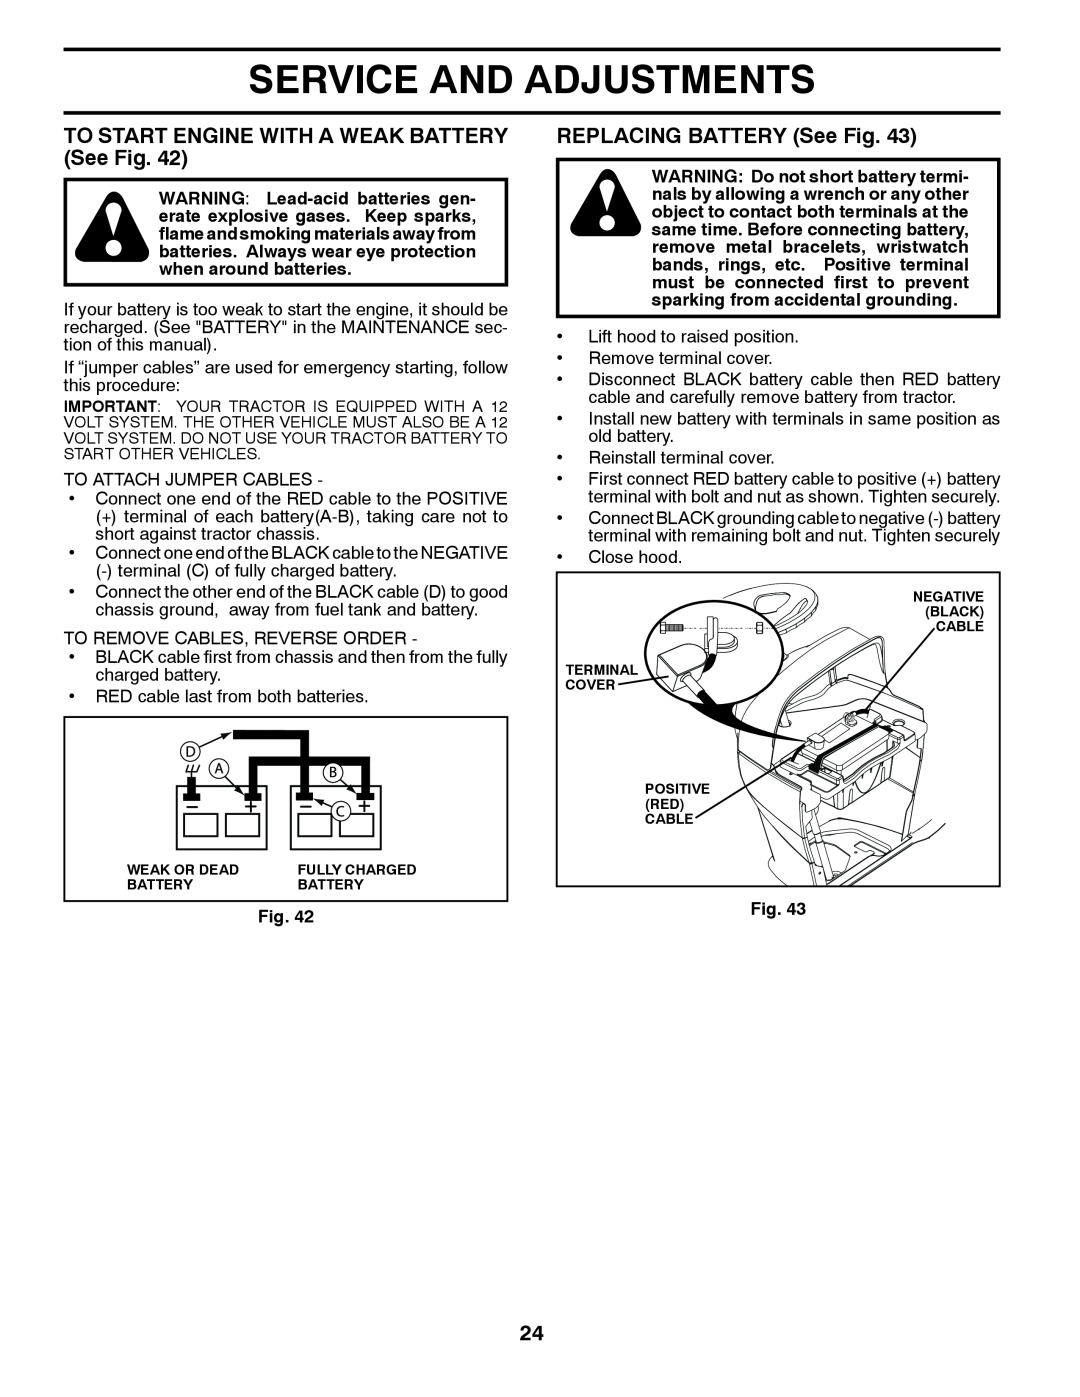 Poulan 532 43 34-32 manual TO START ENGINE WITH A WEAK BATTERY See Fig, REPLACING BATTERY See Fig, Service And Adjustments 